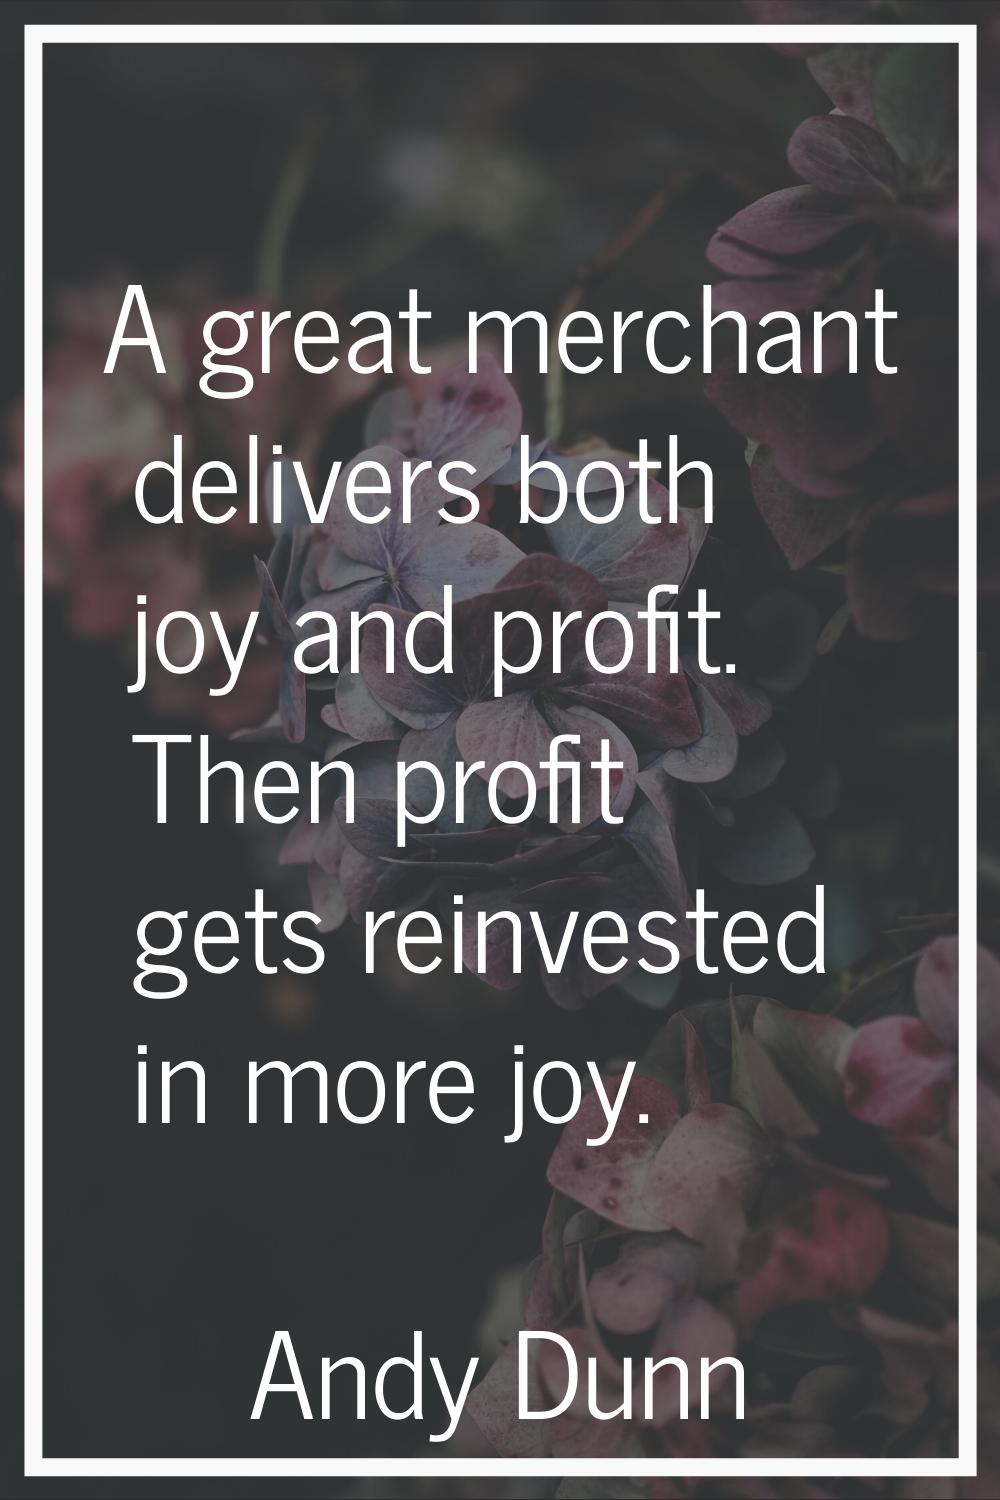 A great merchant delivers both joy and profit. Then profit gets reinvested in more joy.